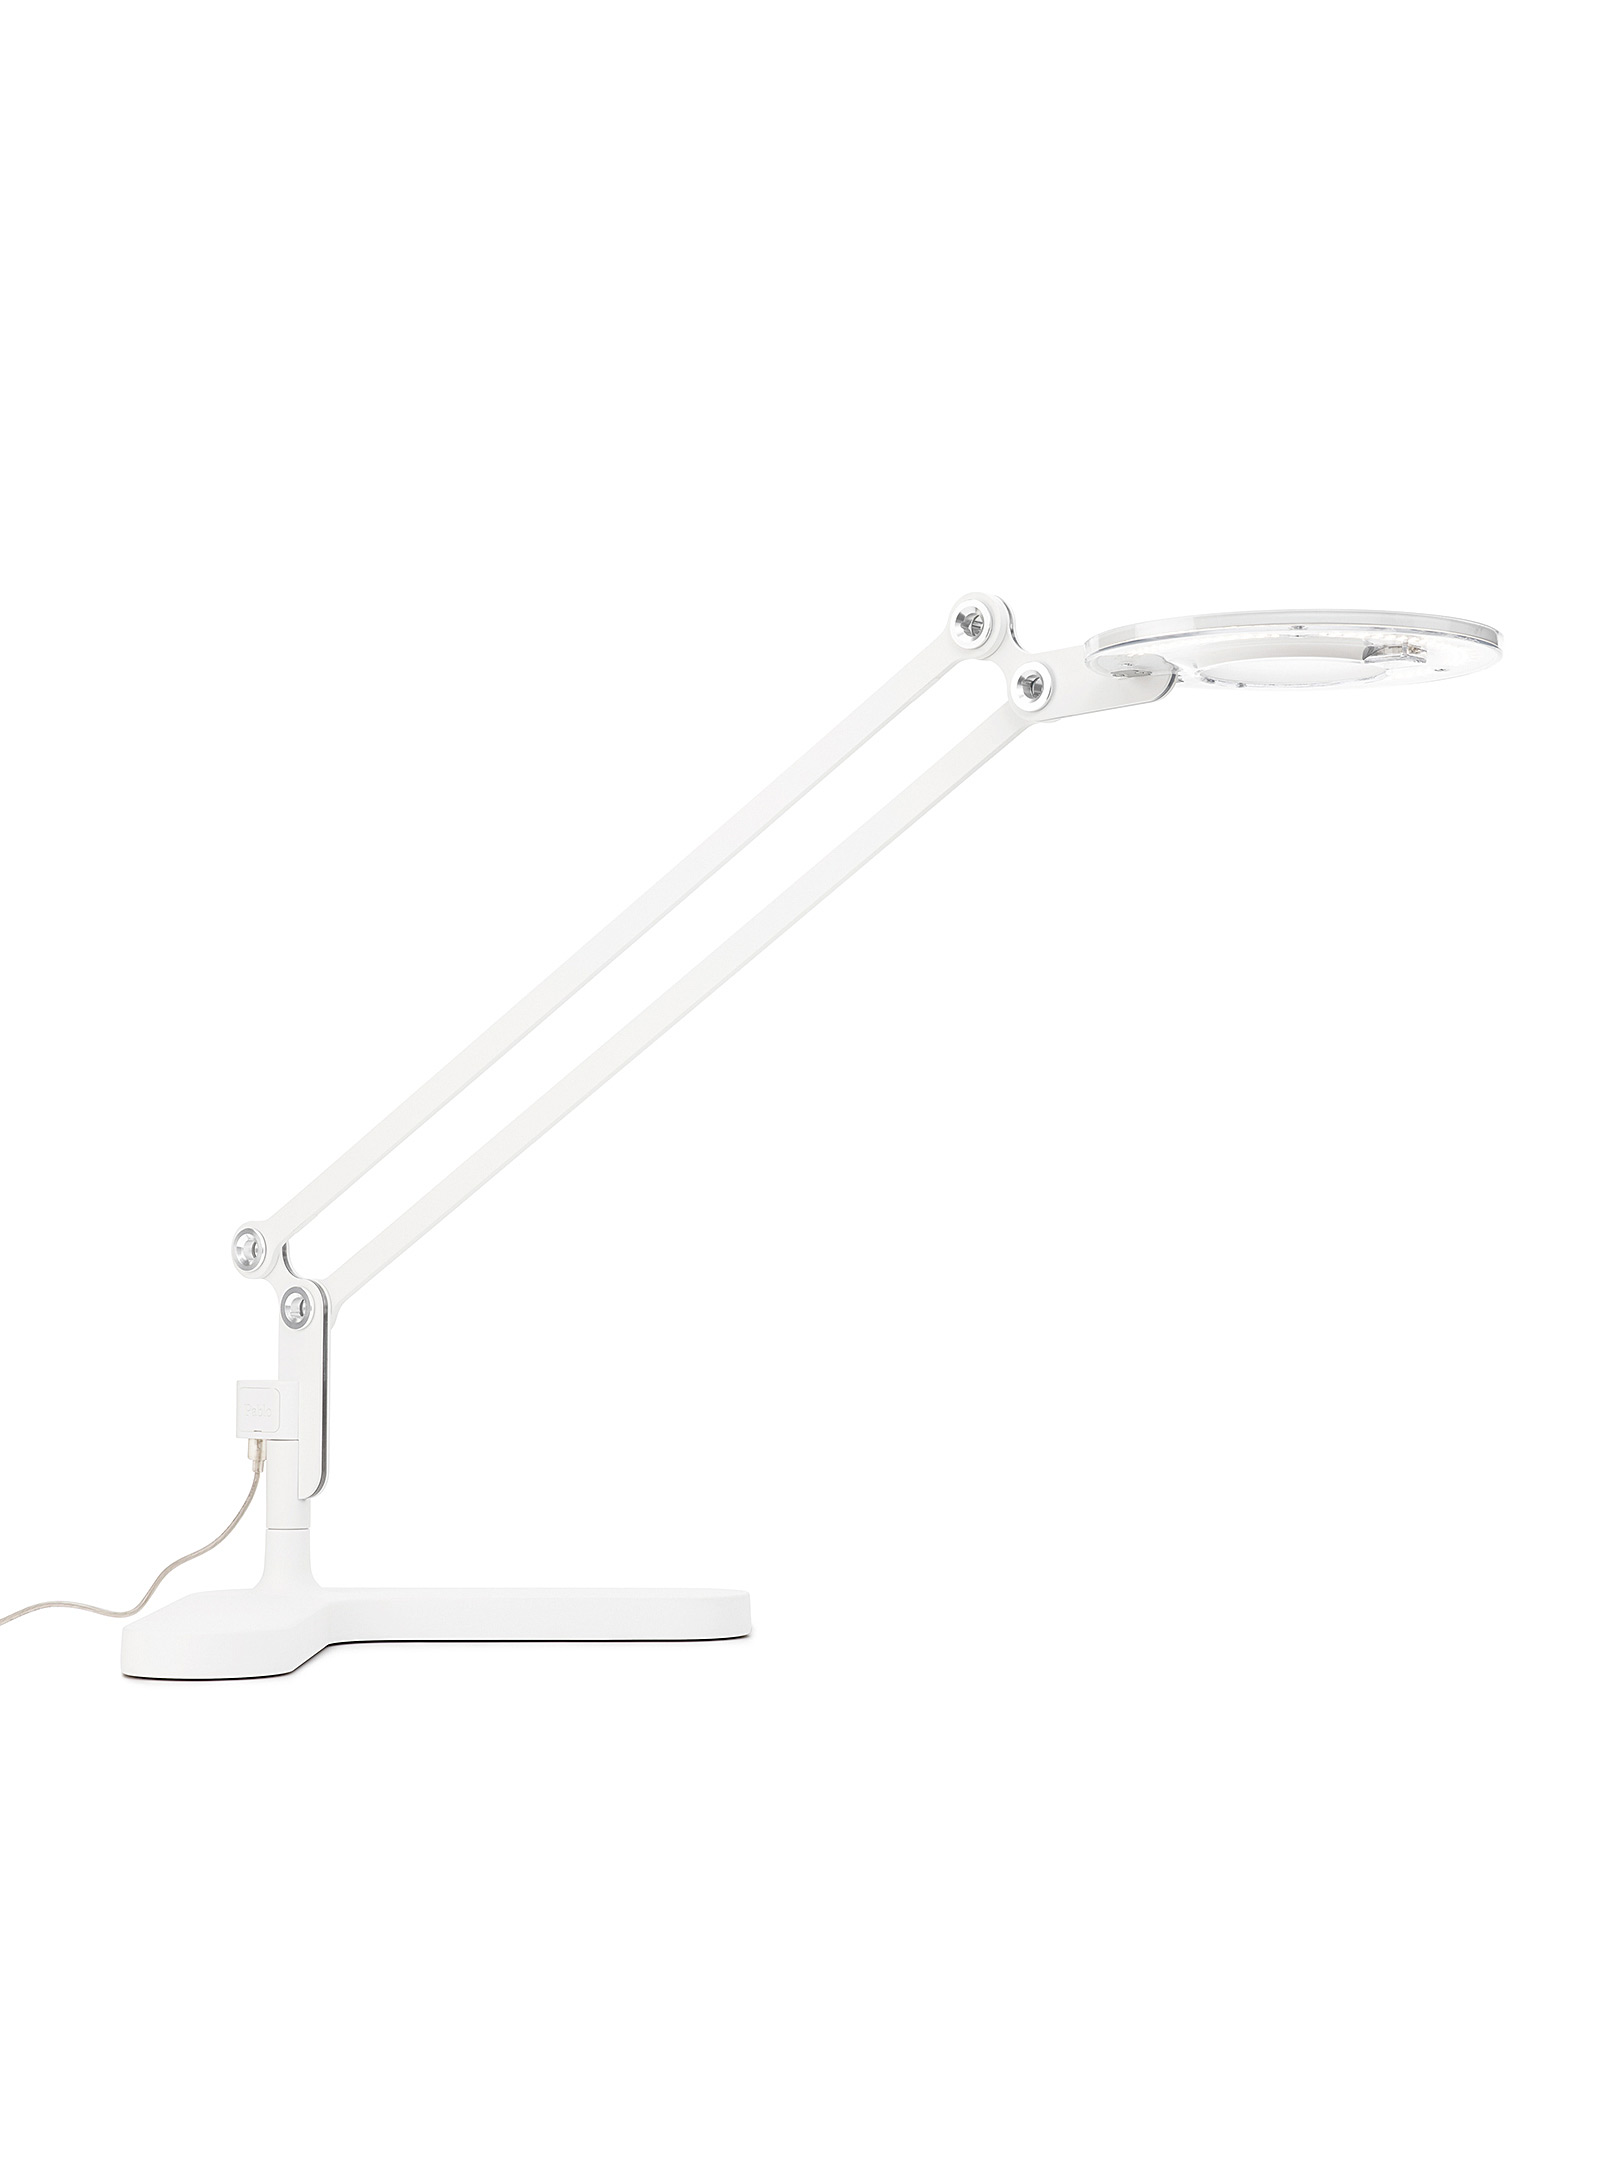 Pablo Designs Link Table Lamp In White